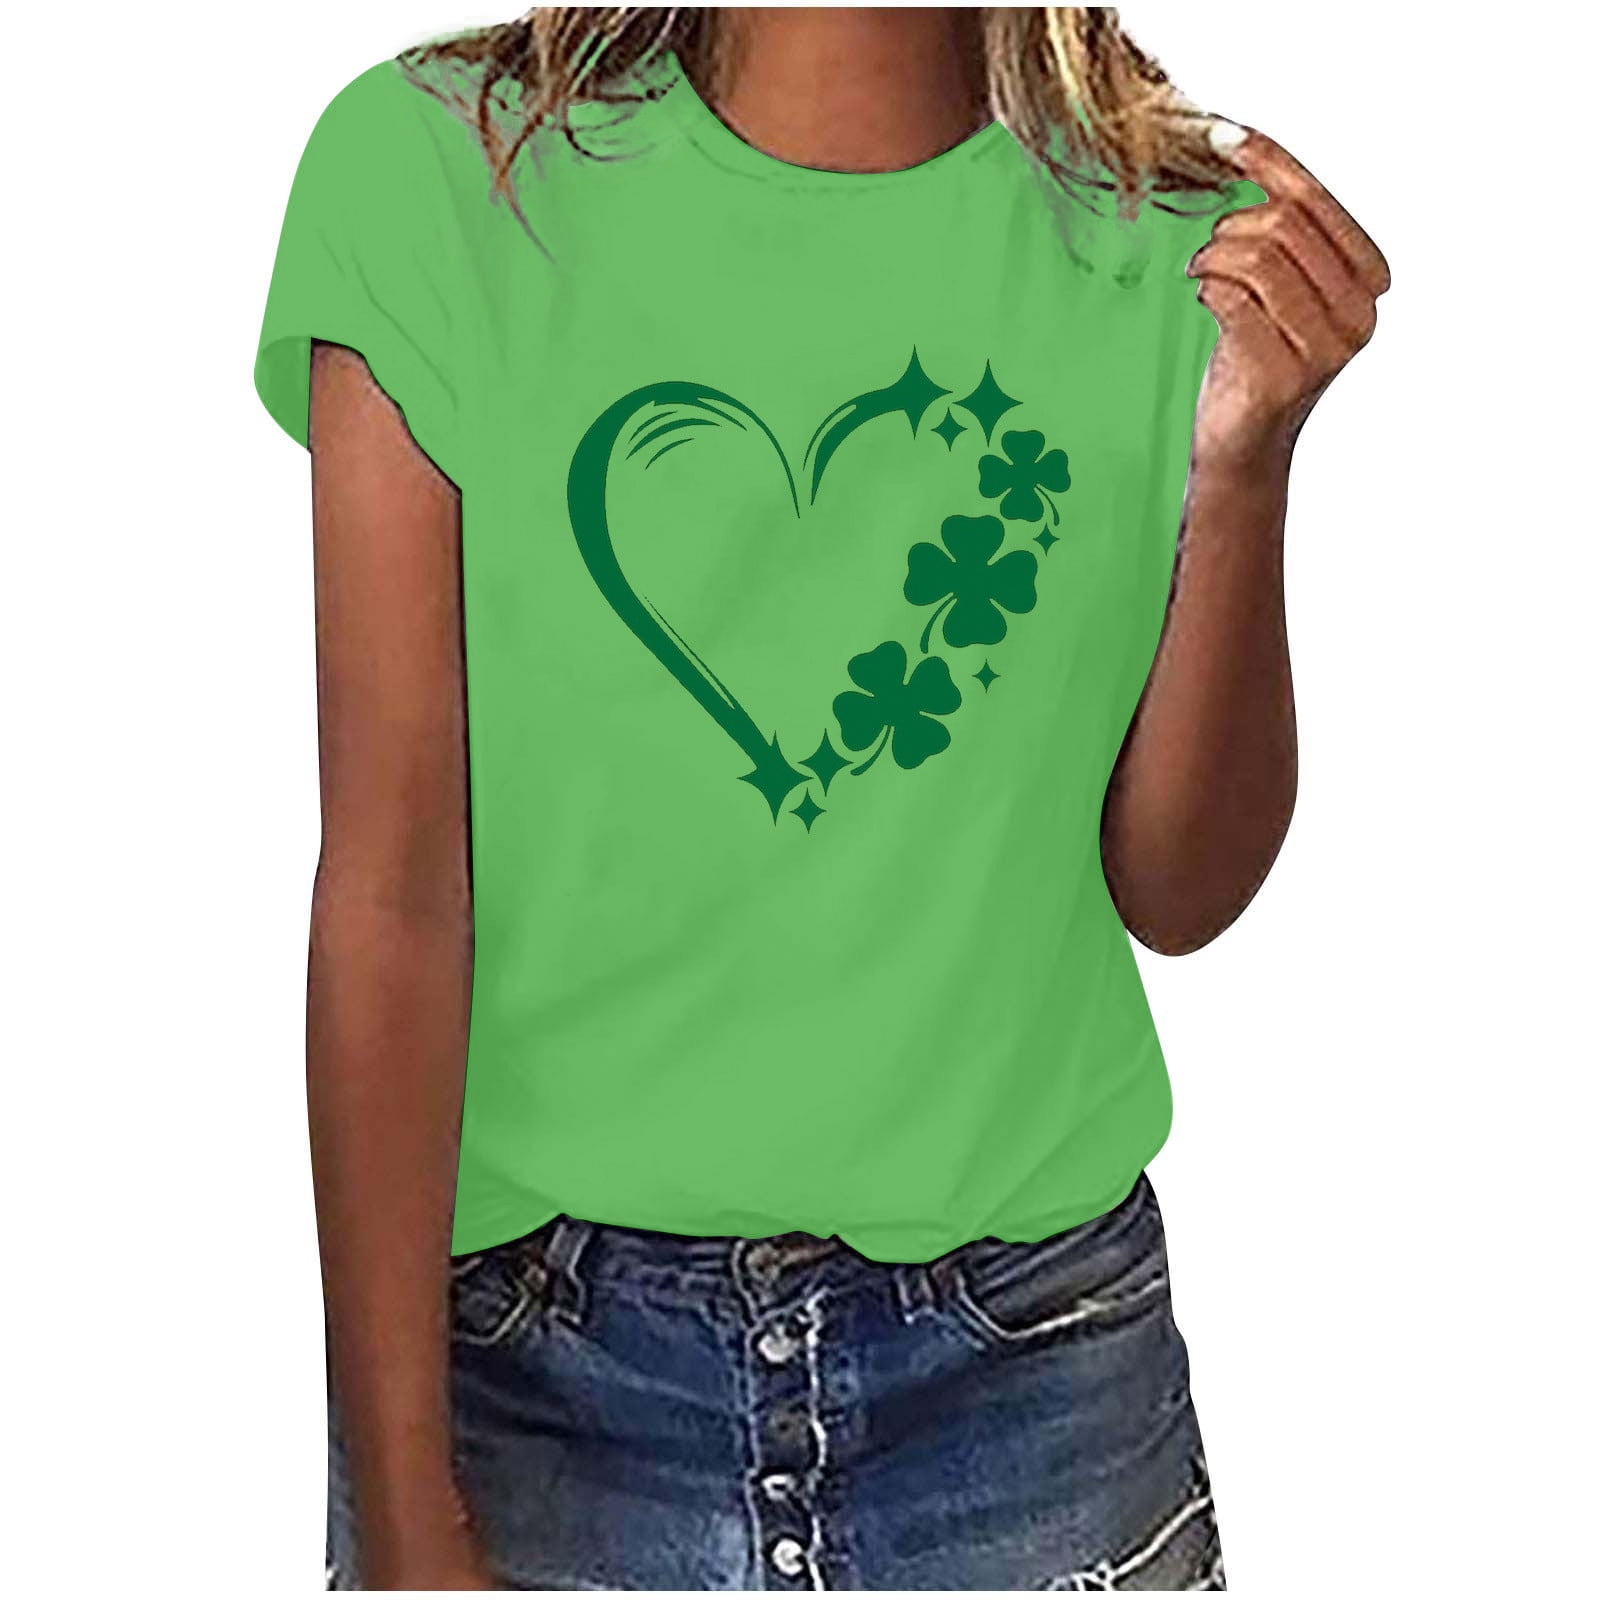  Tunics Or Tops to Wear with Leggings,Womens St Patricks Day  Shirt Short Sleeve Shamrock Leaves Plus Size Tops Round Neck Summer Fashion  St Patricks Day Shirts Camouflage S : Sports 